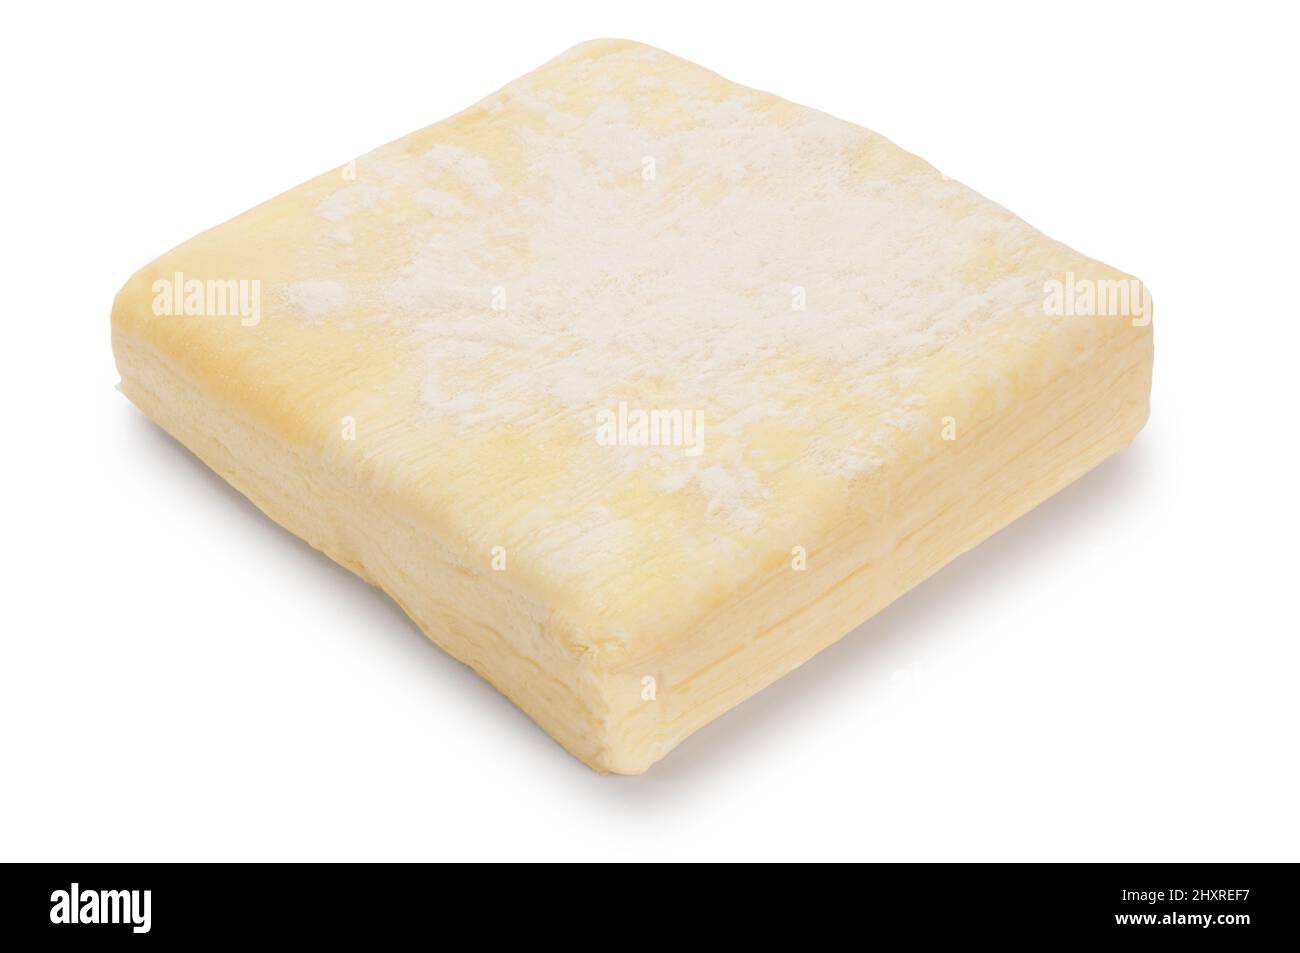 Studio shot of a block of uncooked puff pastry cut out against a white background - John Gollop Stock Photo